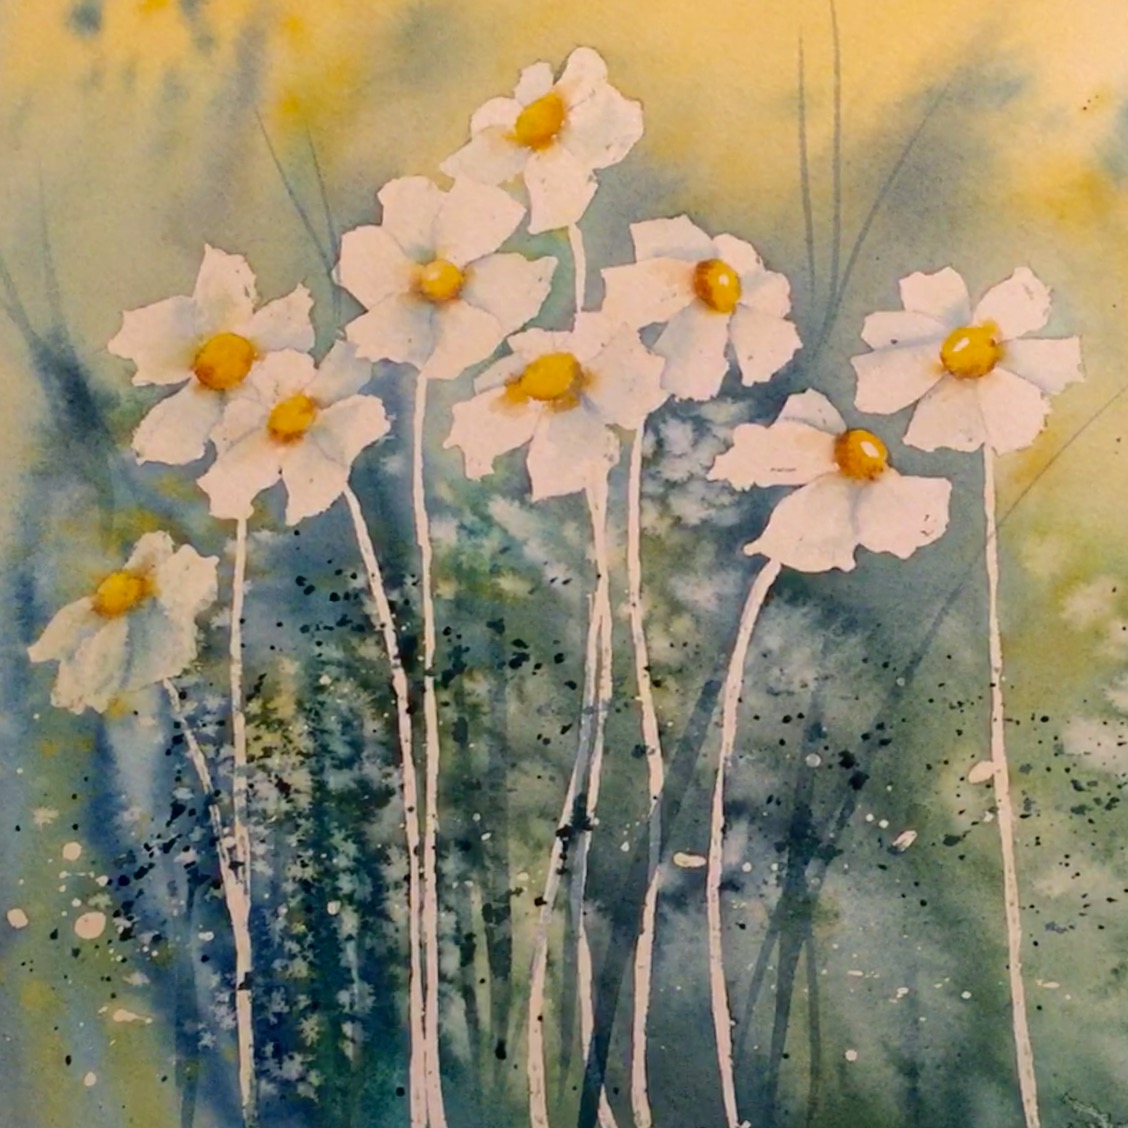 Finished Watercolor Painting of Daisies